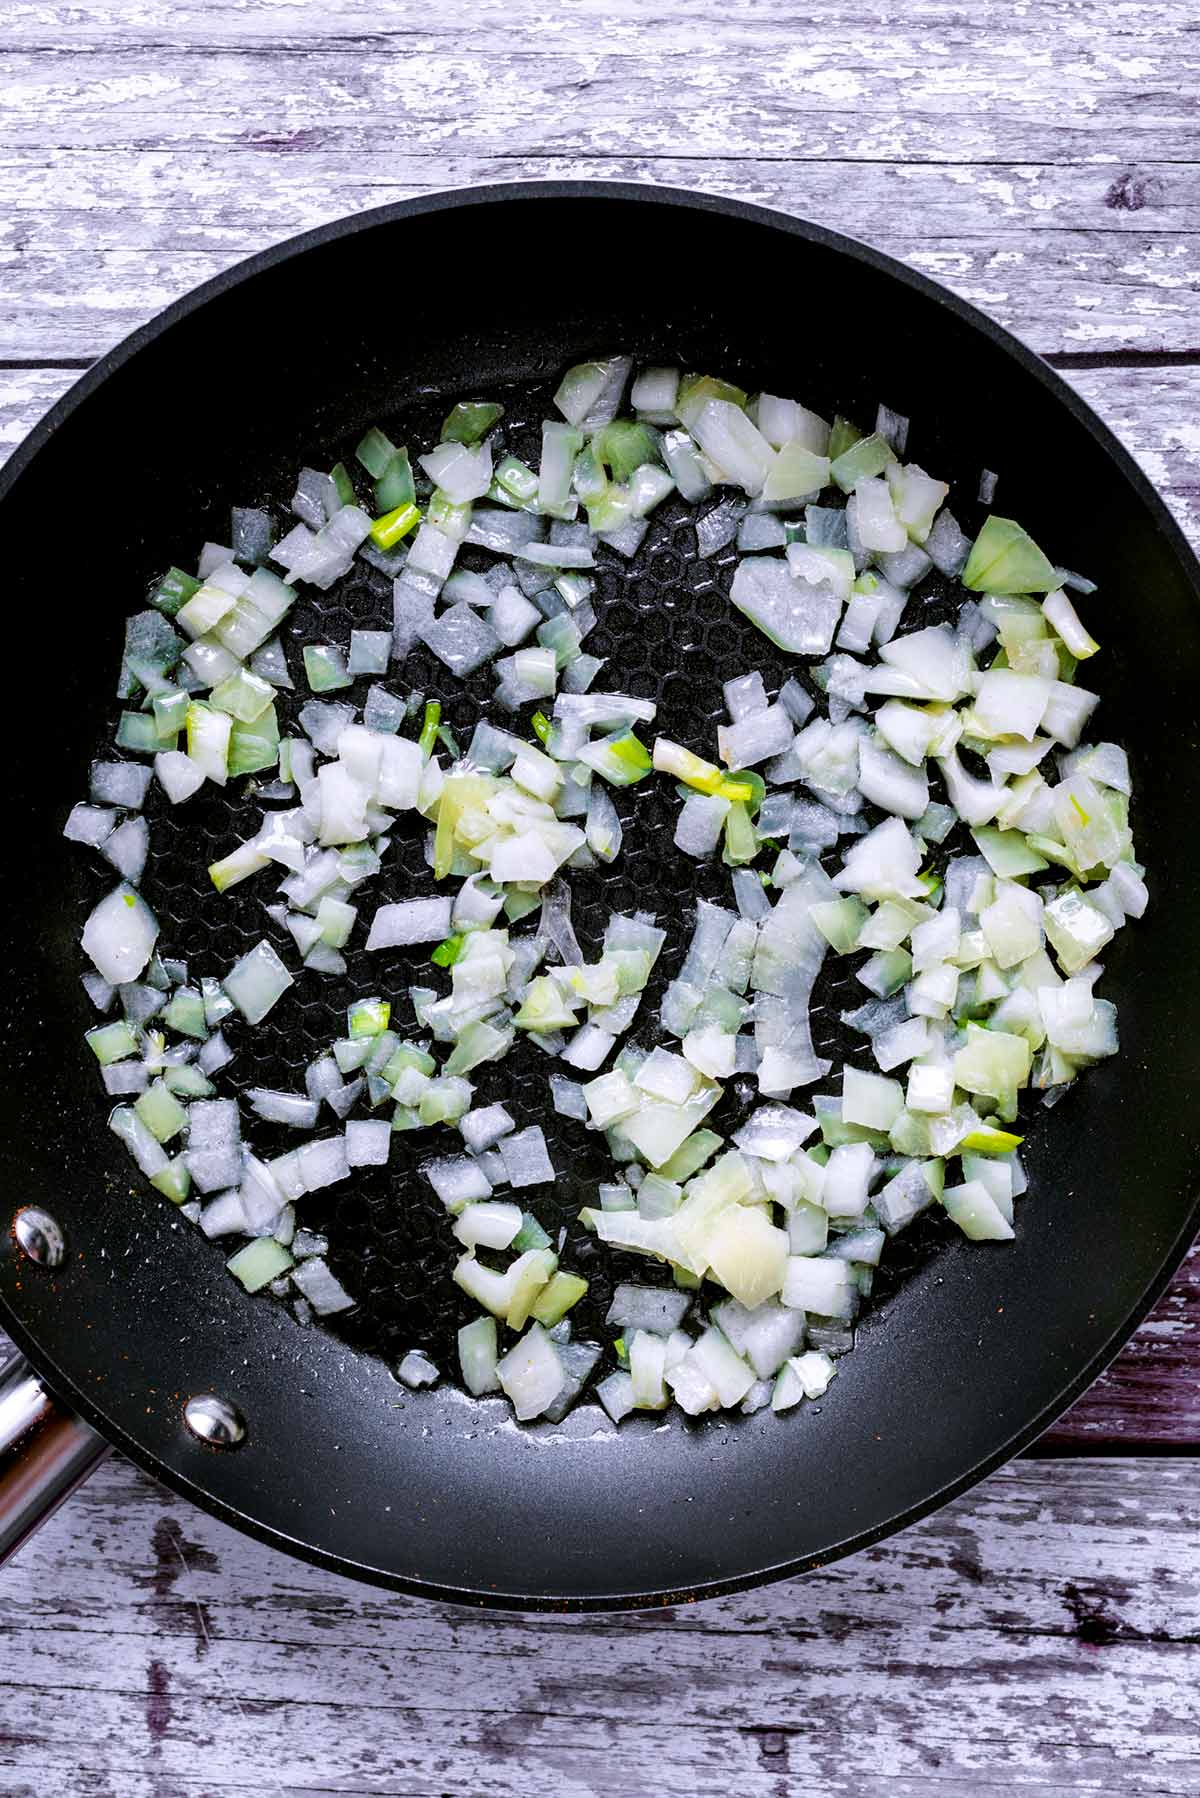 Chopped onions cooking in a frying pan.